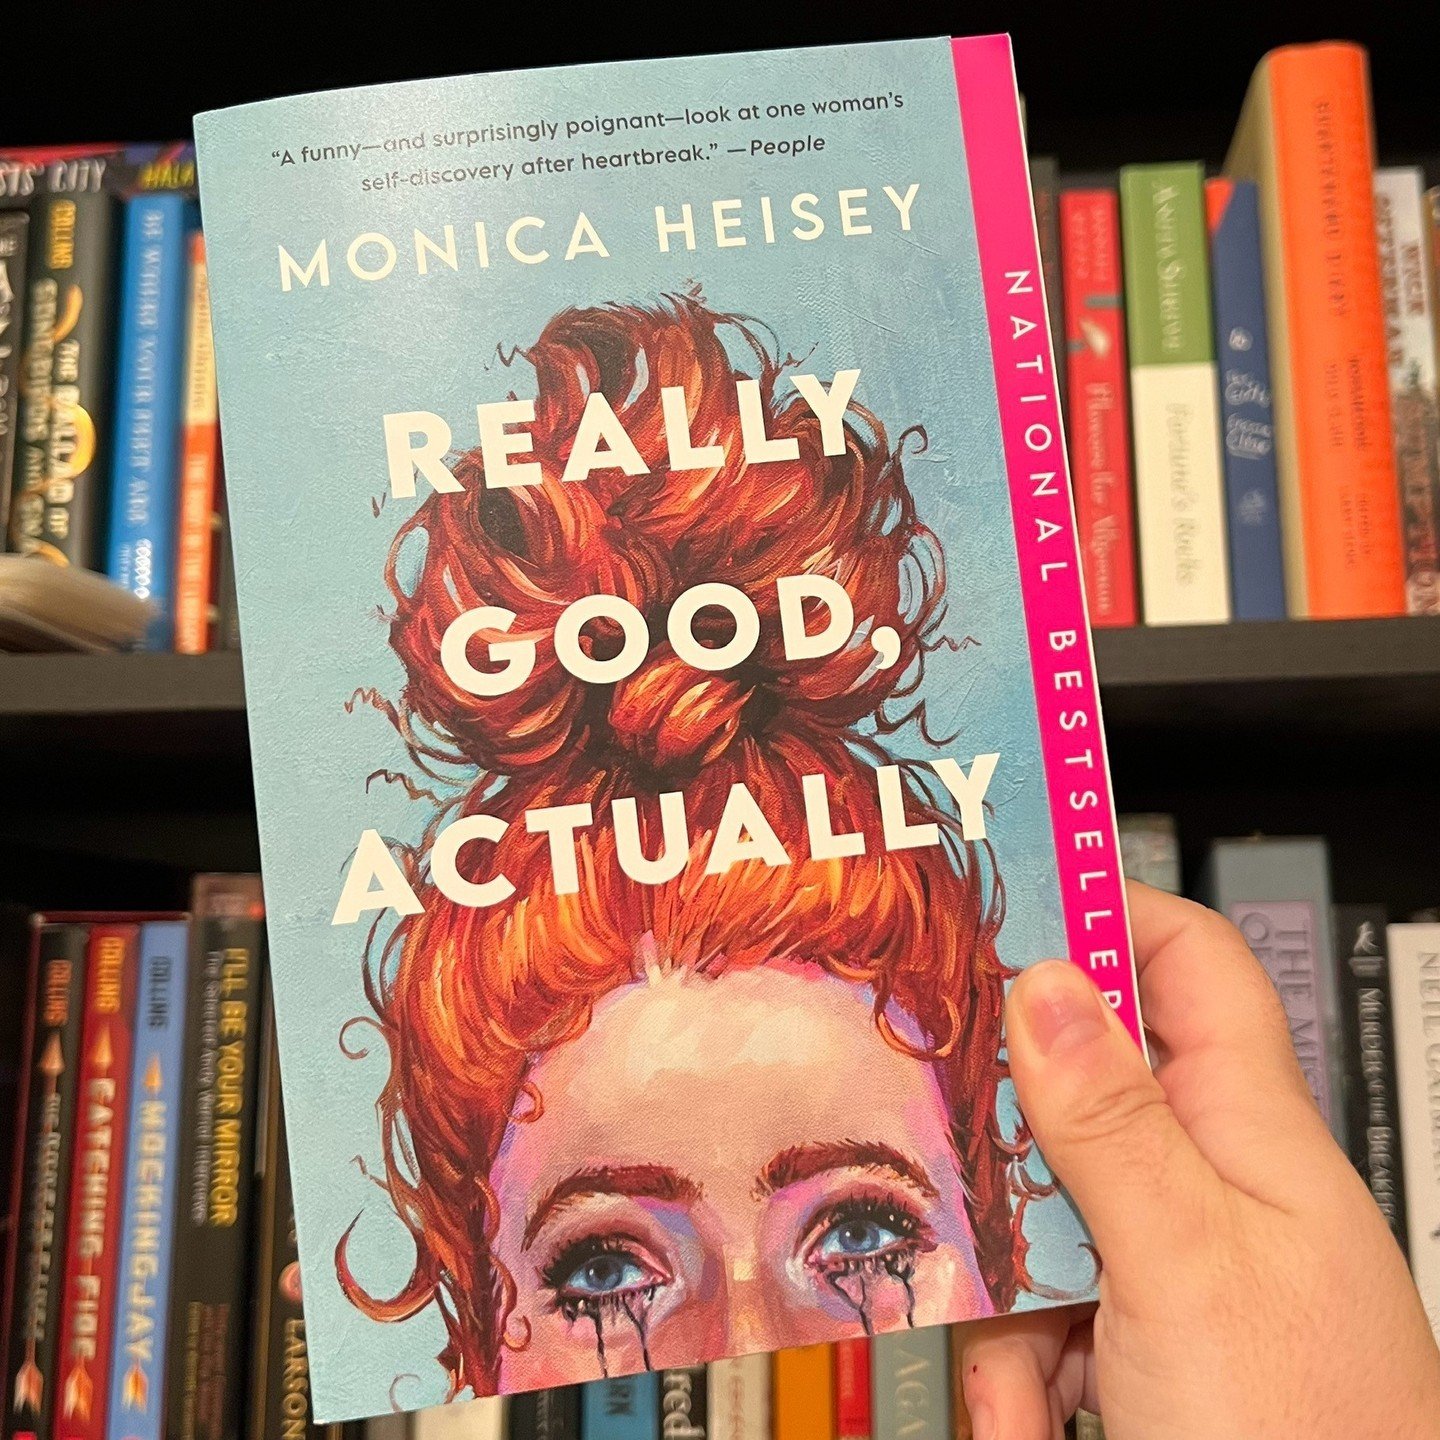 We can't wait to read this laugh-out-loud novel from Monica Heisey.⁠
⁠
⁠
🫠 Maggie is fine. She&rsquo;s doing really good, actually. Sure, she&rsquo;s broke, her graduate thesis on something obscure is going nowhere, and her marriage only lasted 608 